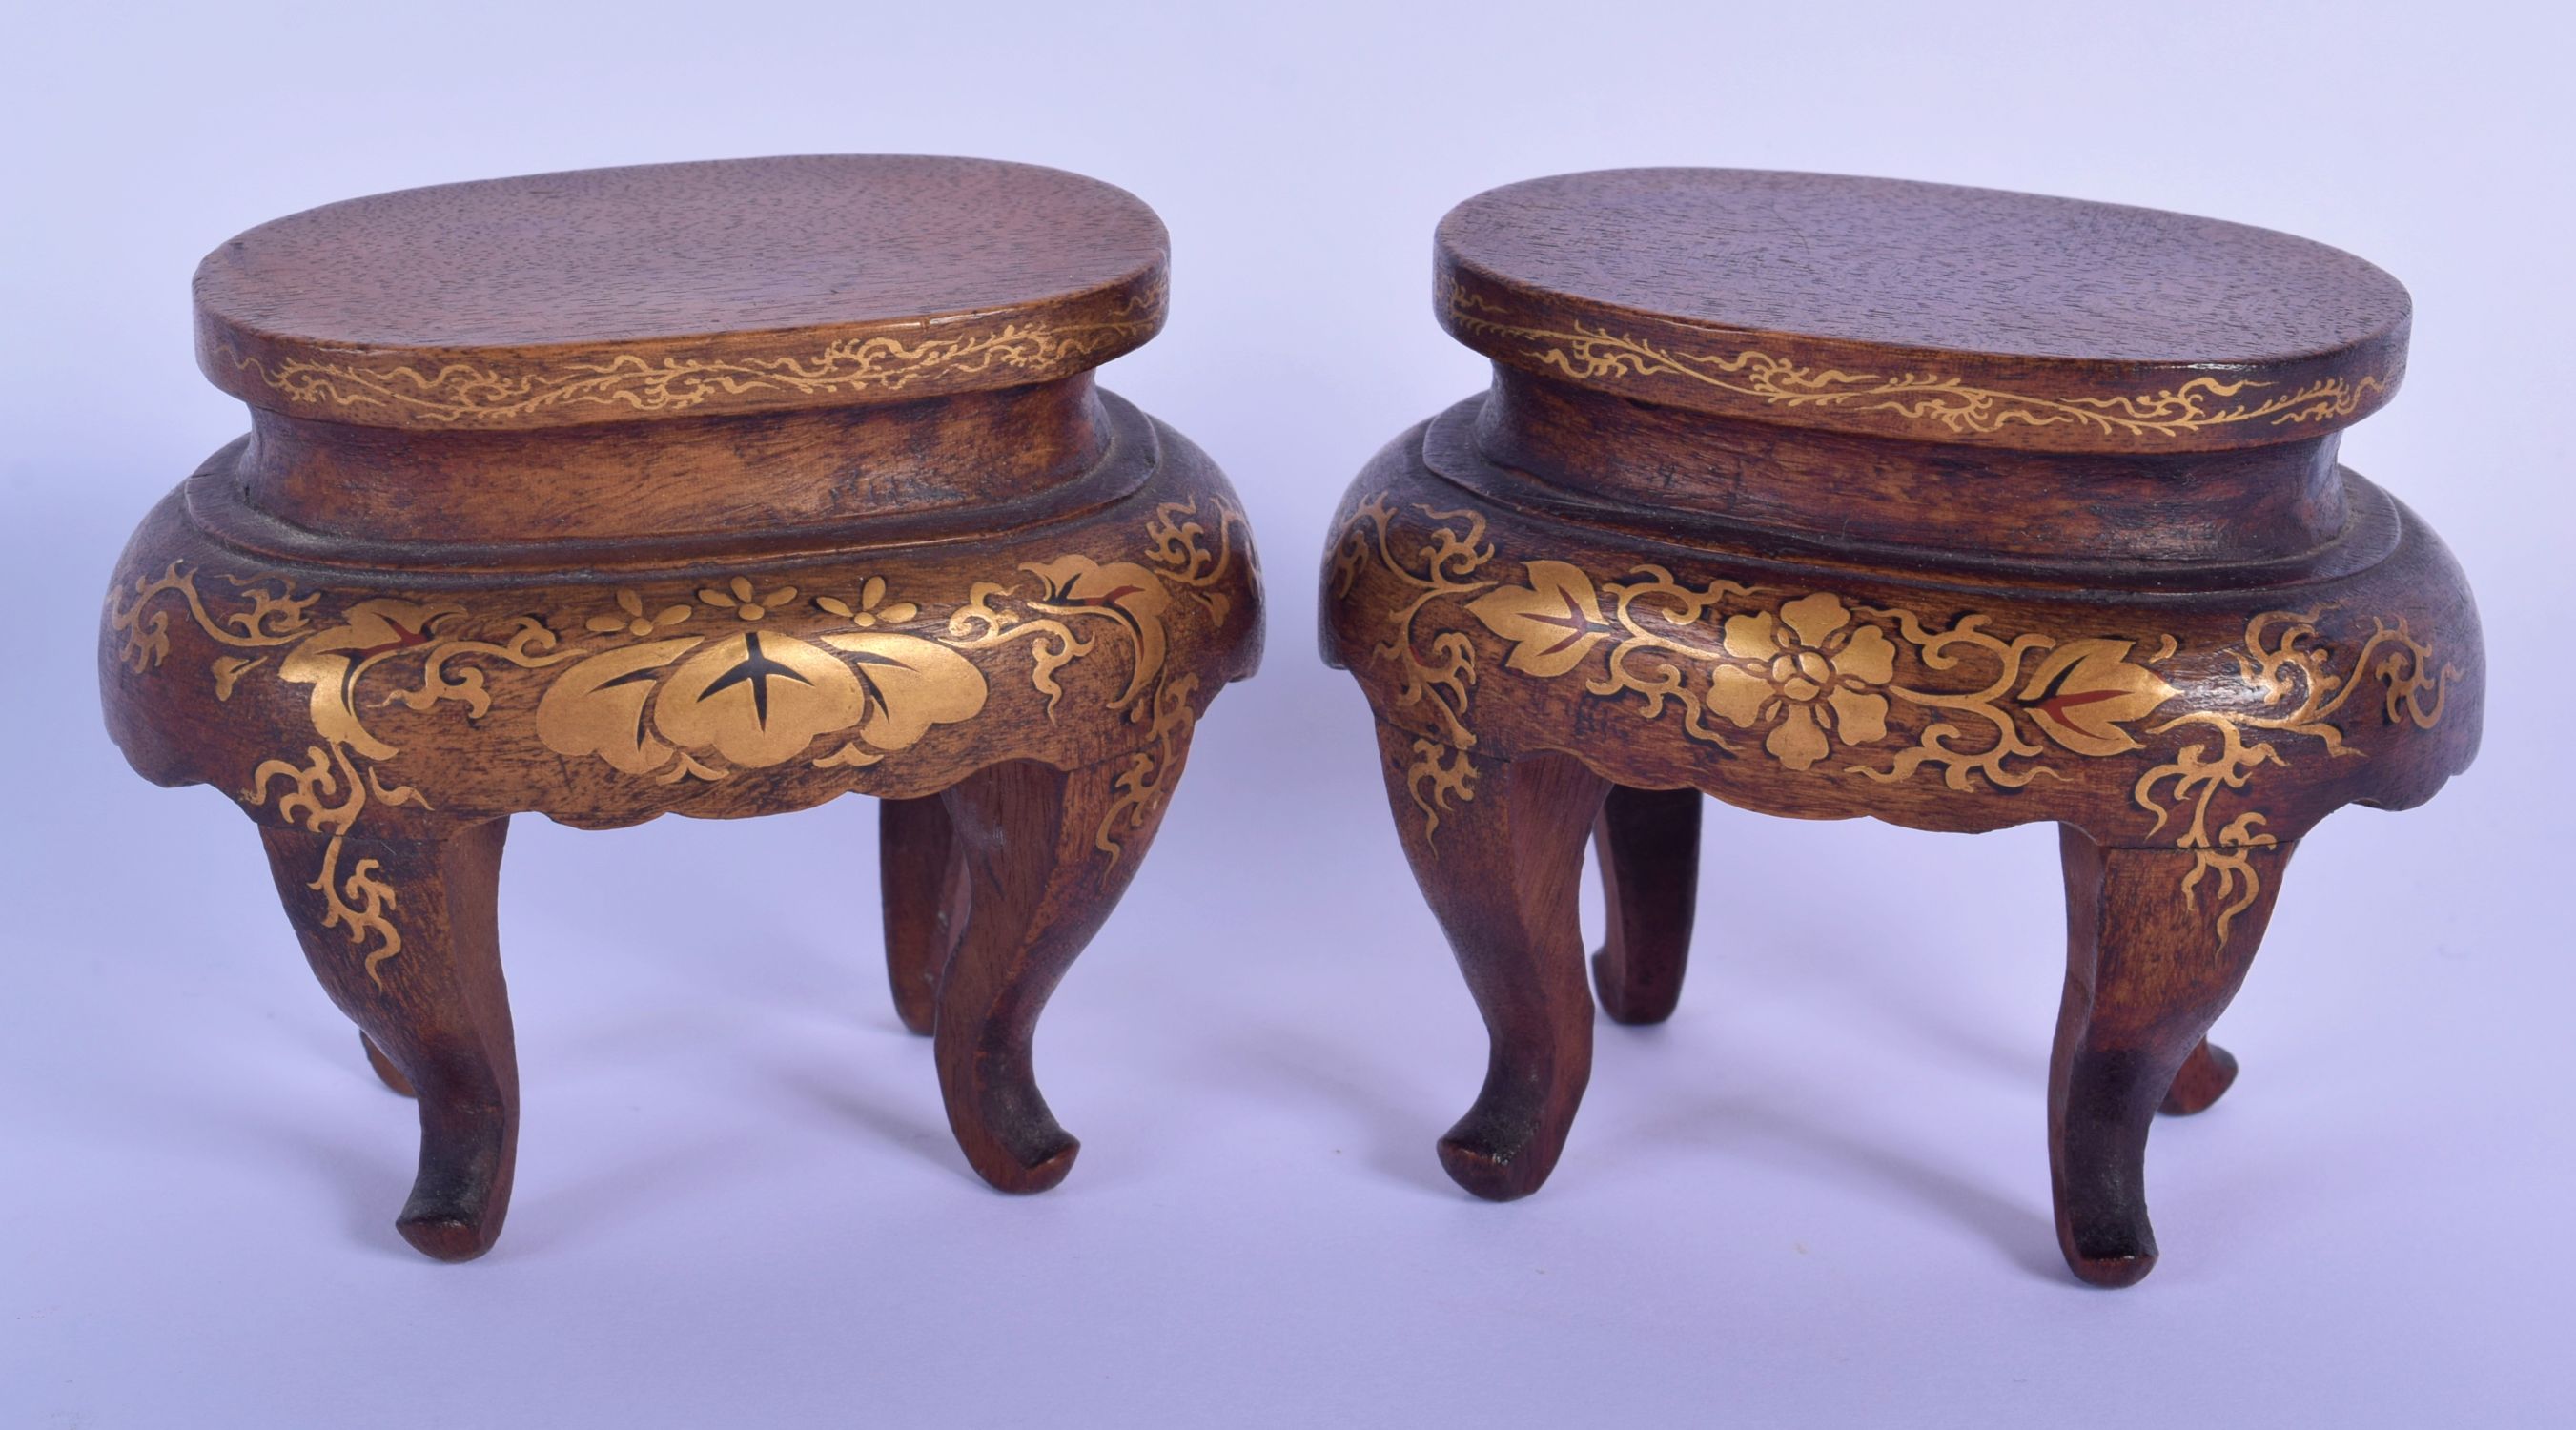 A PAIR OF 19TH CENTURY JAPANESE MEIJI PERIOD GOLD LACQUERED STANDS decorated with foliage. 8 cm x 8